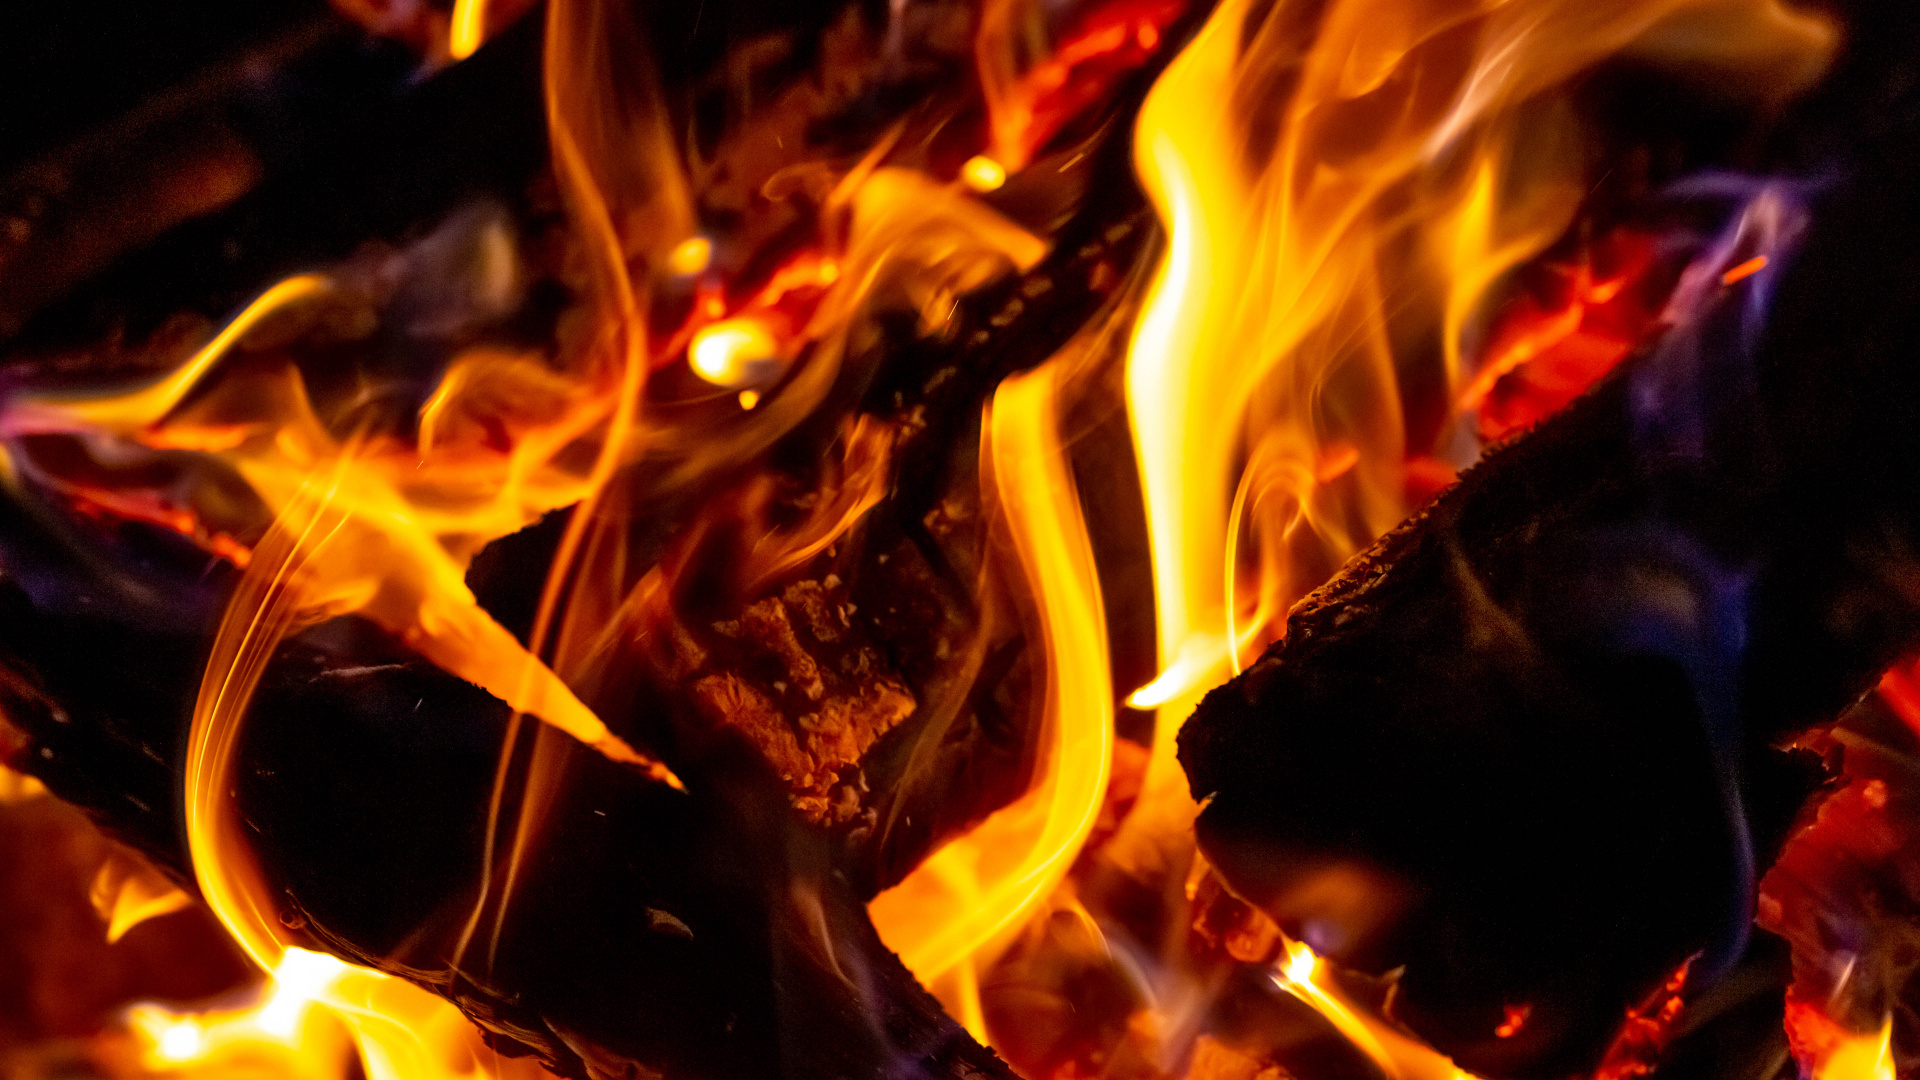 Orange and Black Fire in Close up Photography. Wallpaper in 1920x1080 Resolution